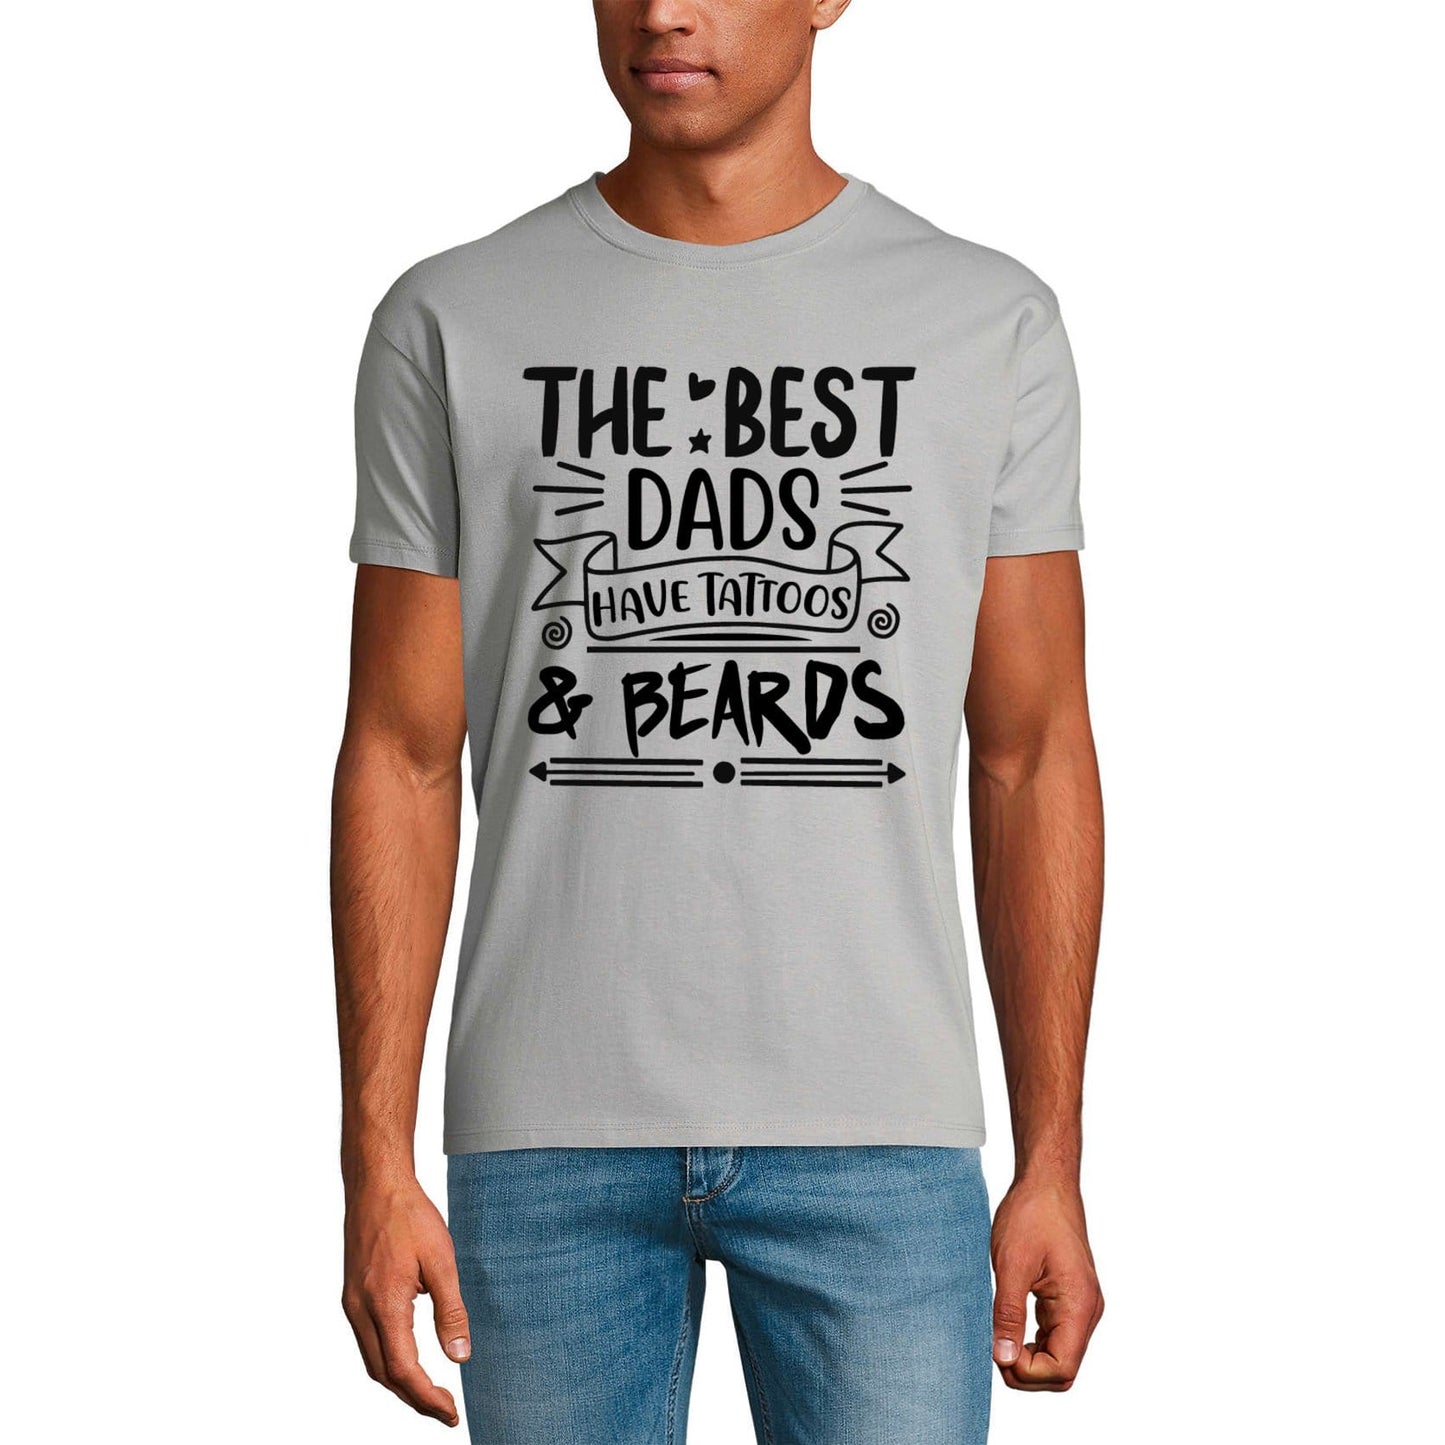 ULTRABASIC Men's Graphic T-Shirt The Best Dads Have Tattoos and Beards - Funny Father's Quote